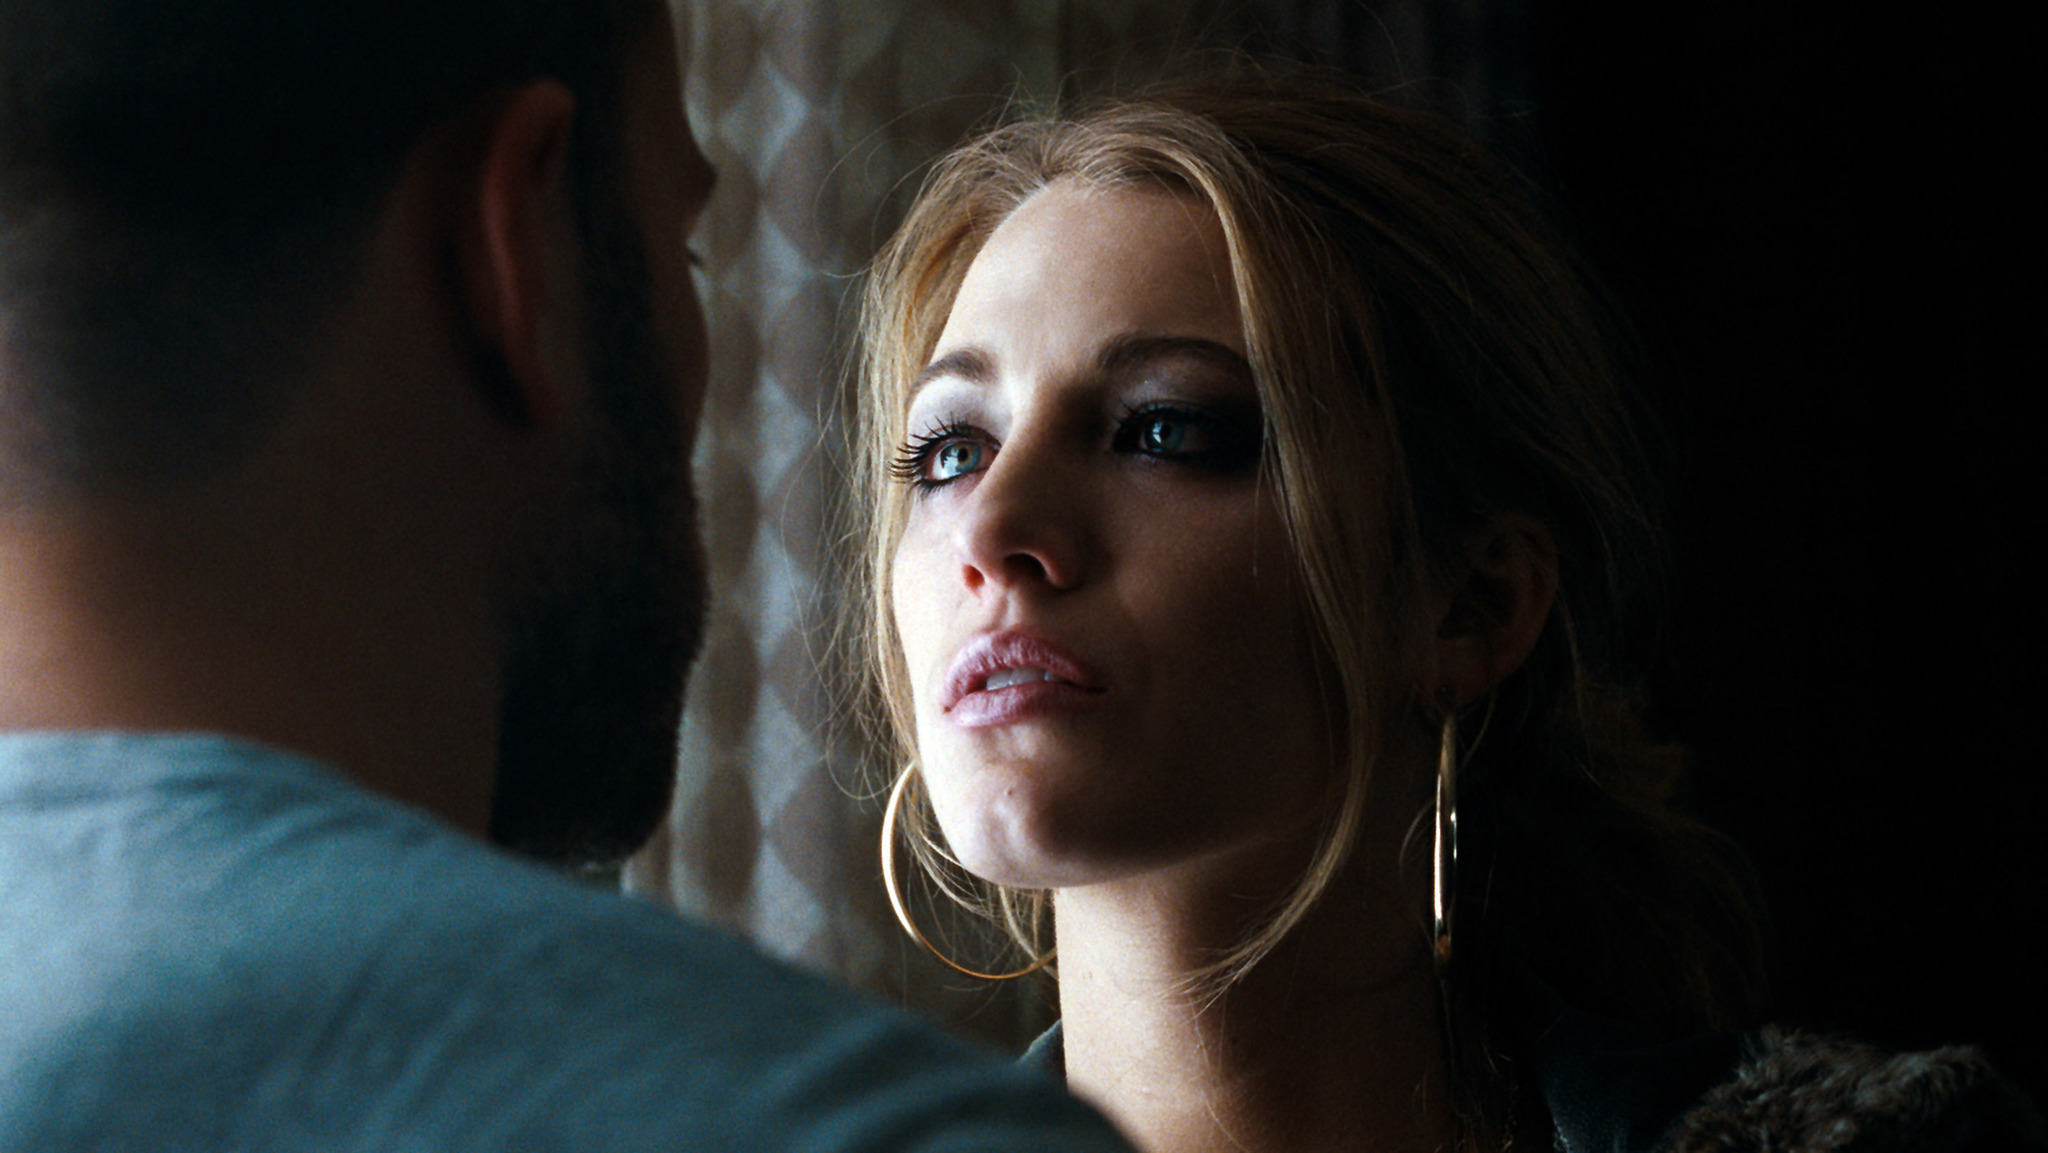 Still of Ben Affleck and Blake Lively in Miestas (2010)